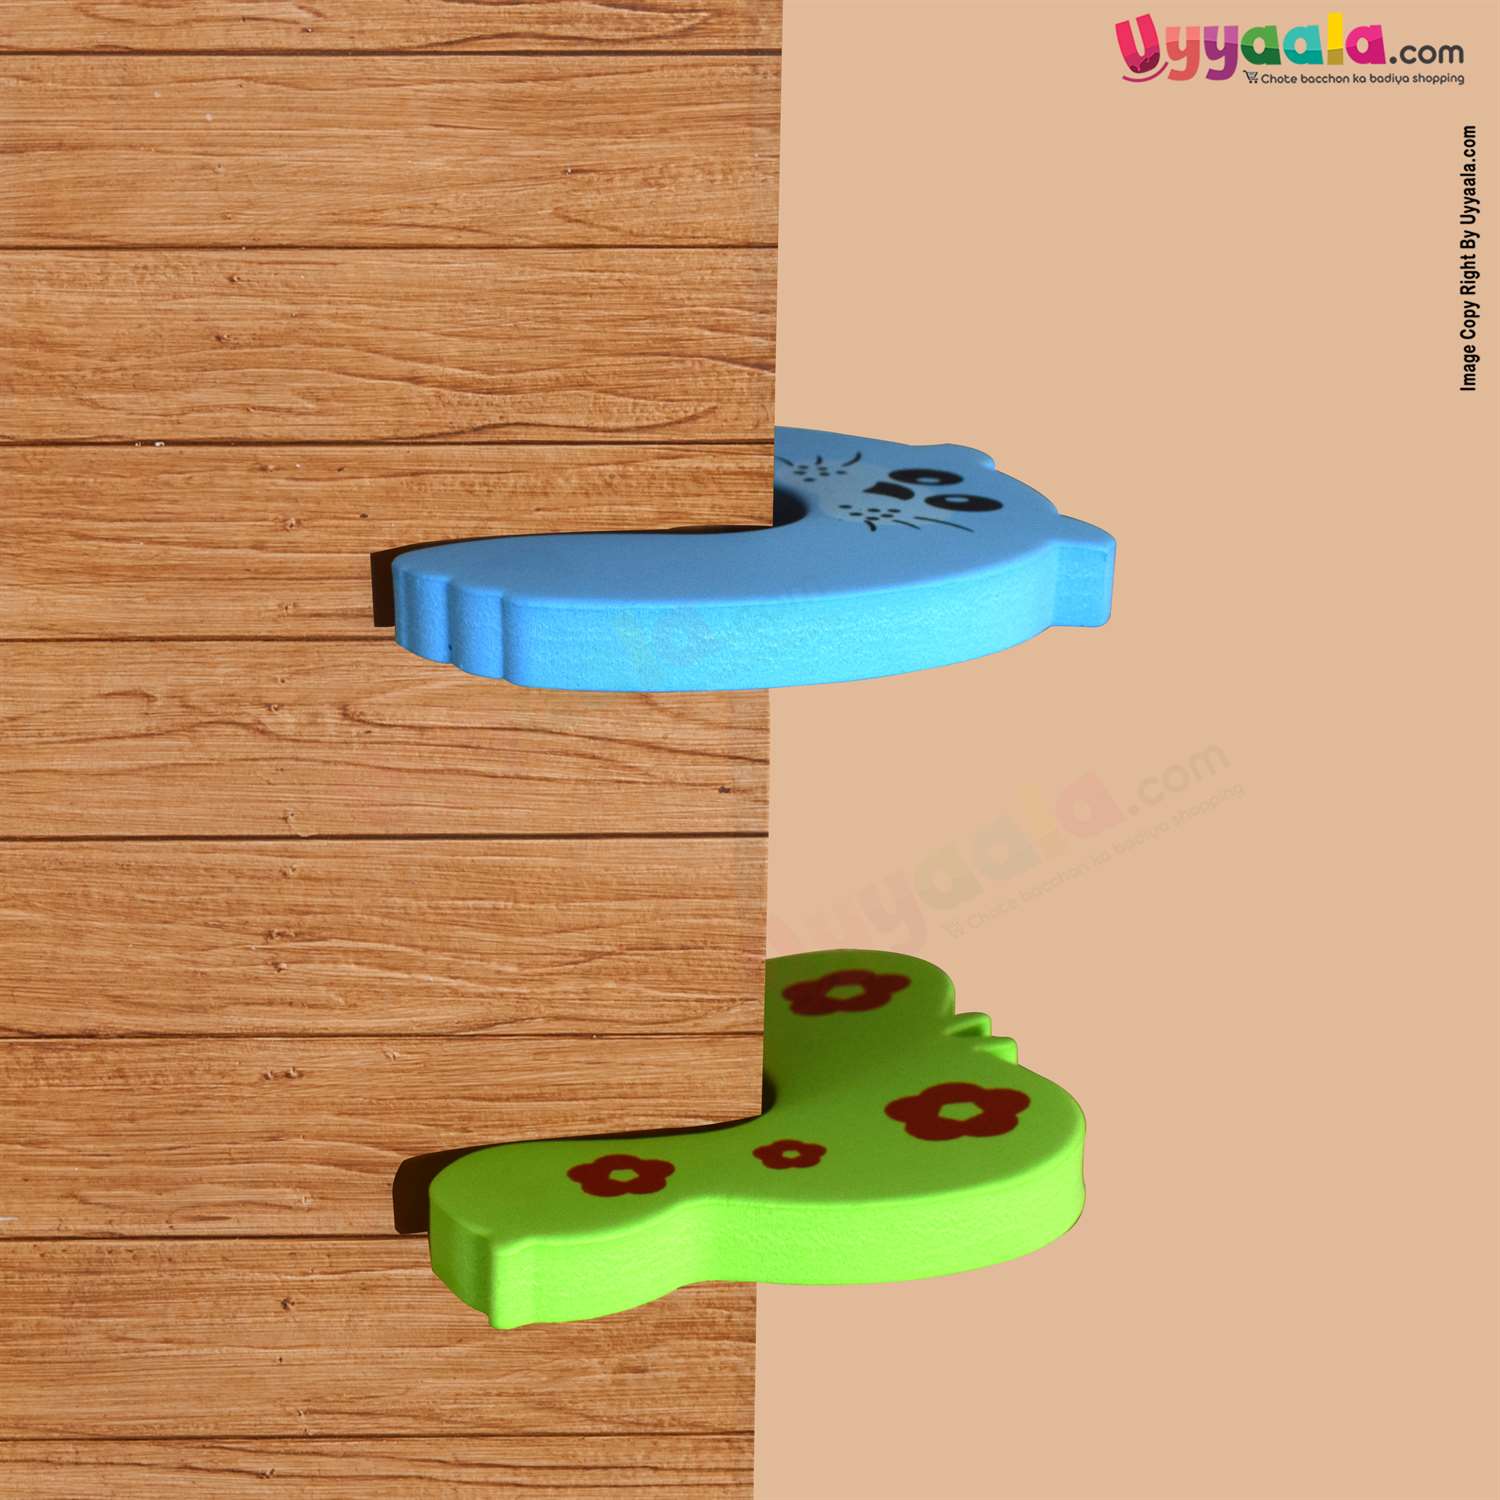 DR GYM Safety Corner Door Guard For Kids Safety With Animal Shapes, 2 pack- Green & Blue